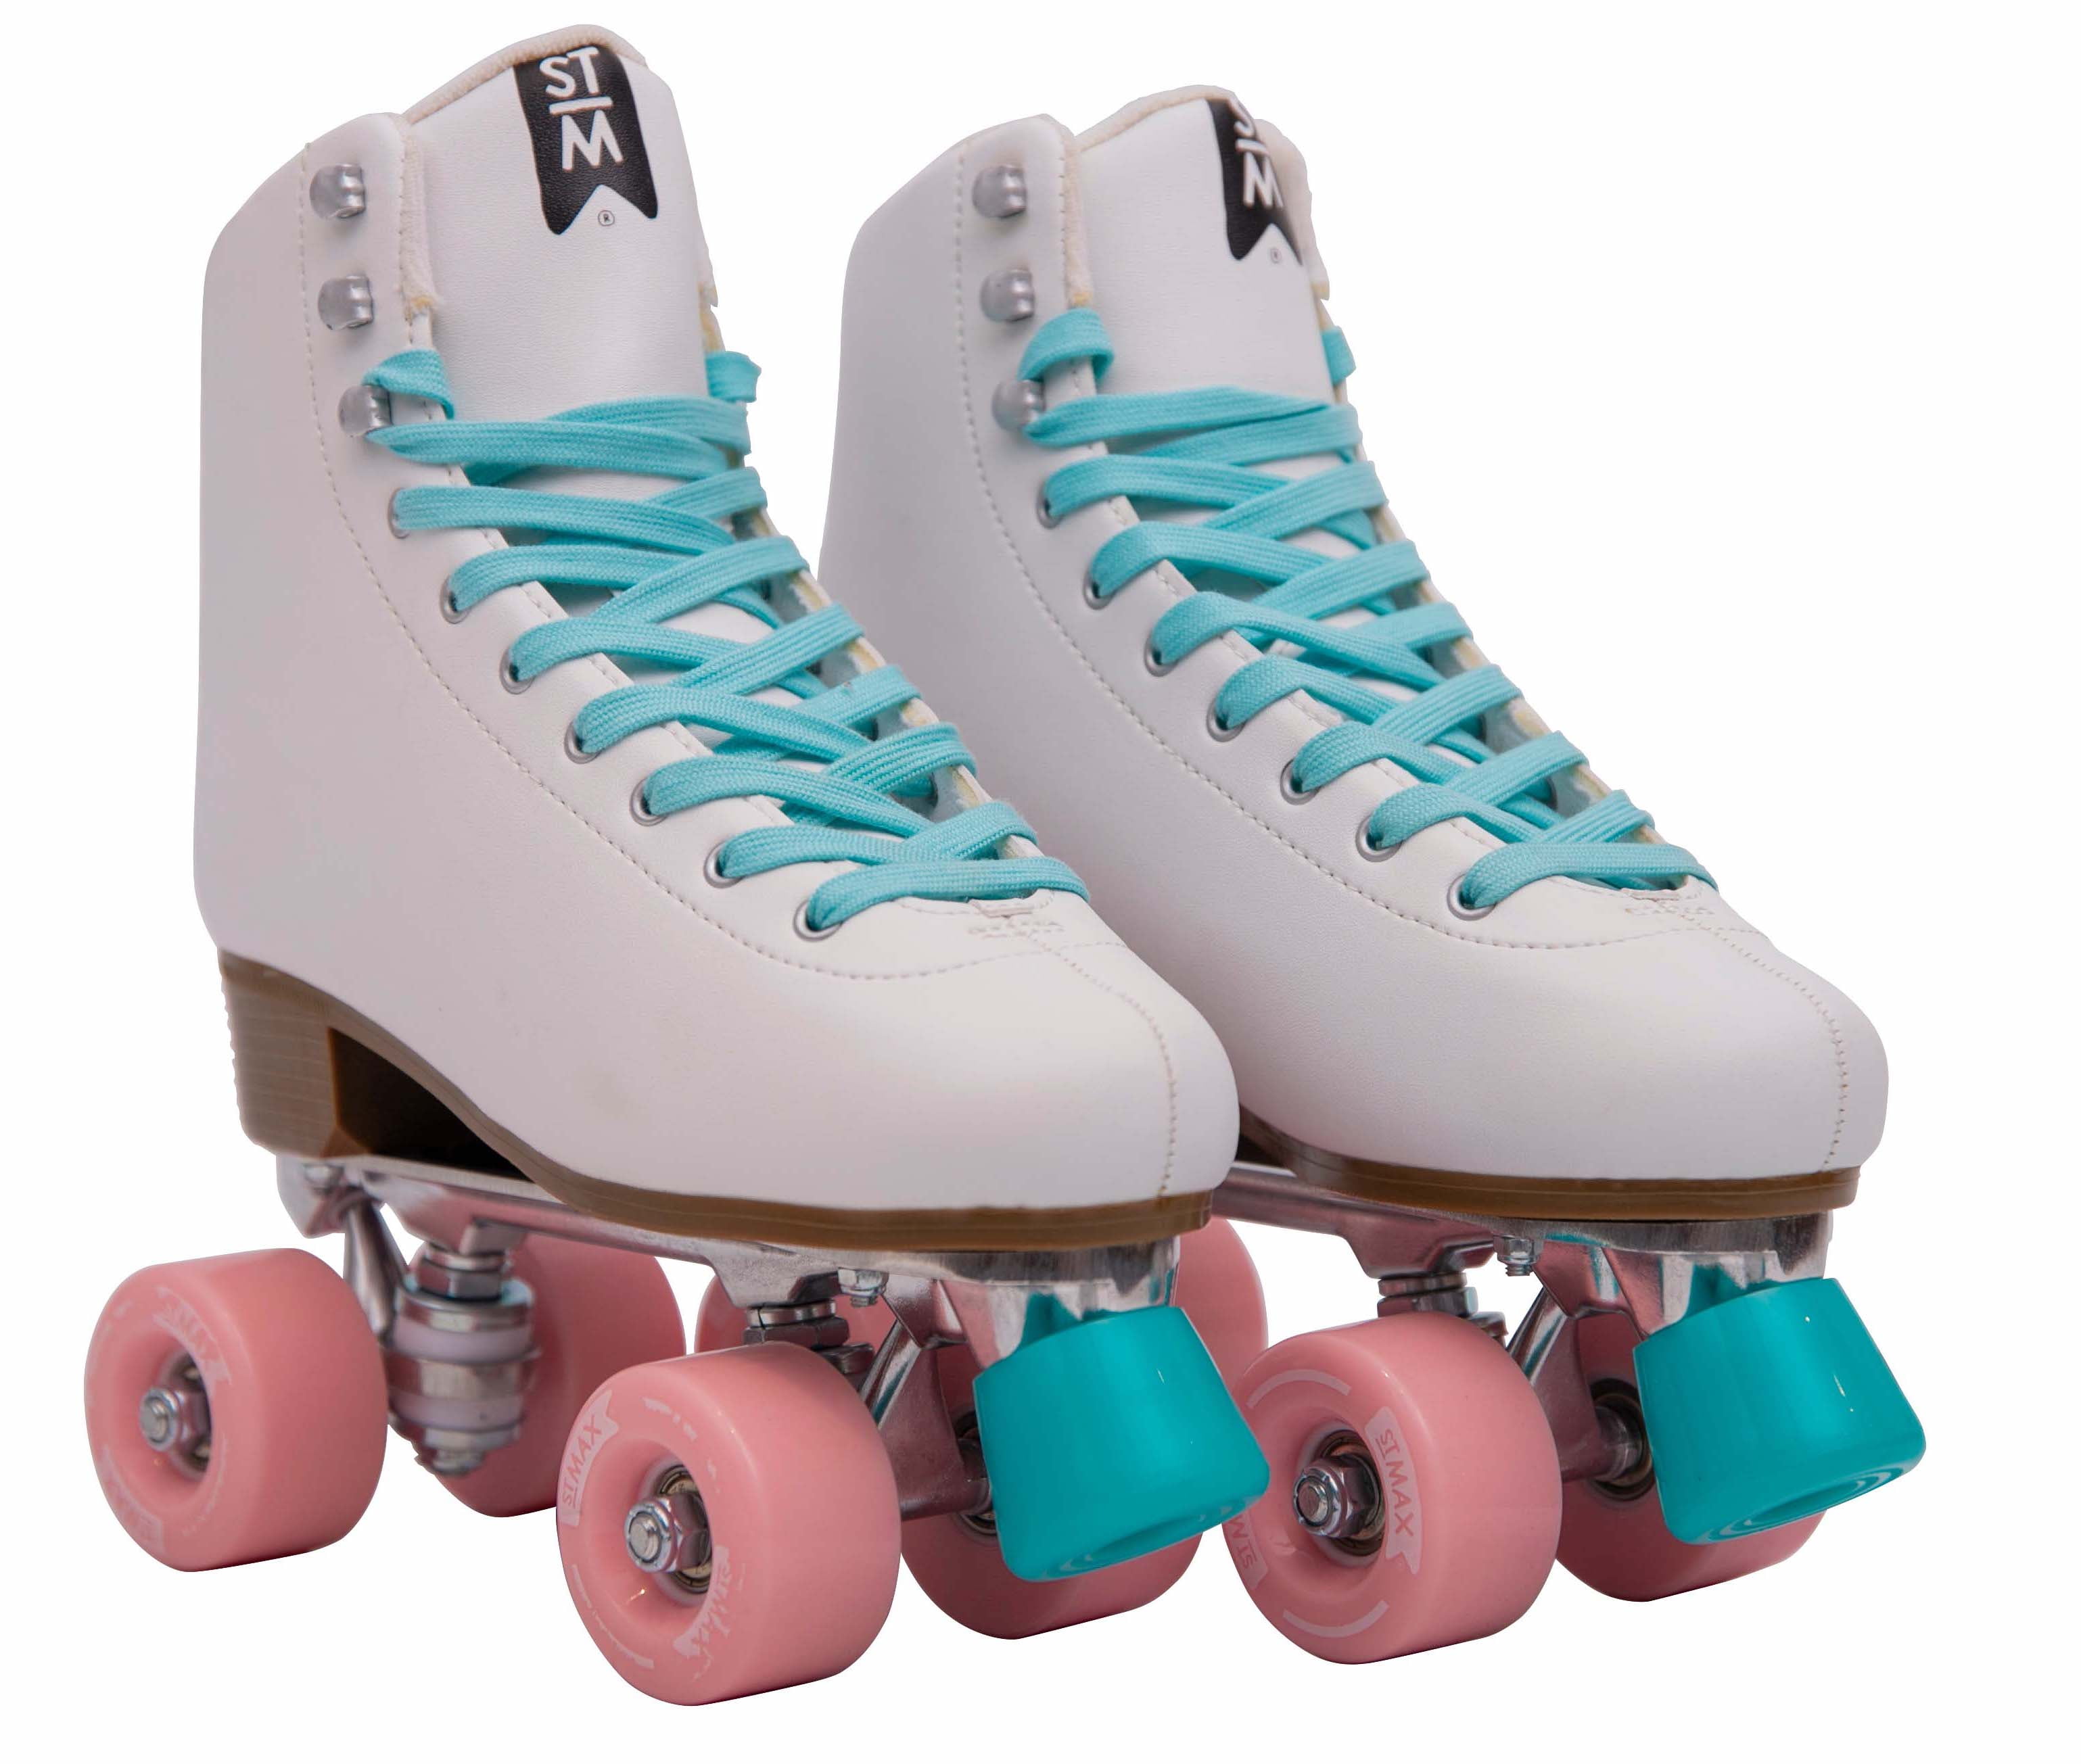 STMAX Rollerblades for Women ABEC 7 Size 9 Inline Skates for Adults PU Wheels 